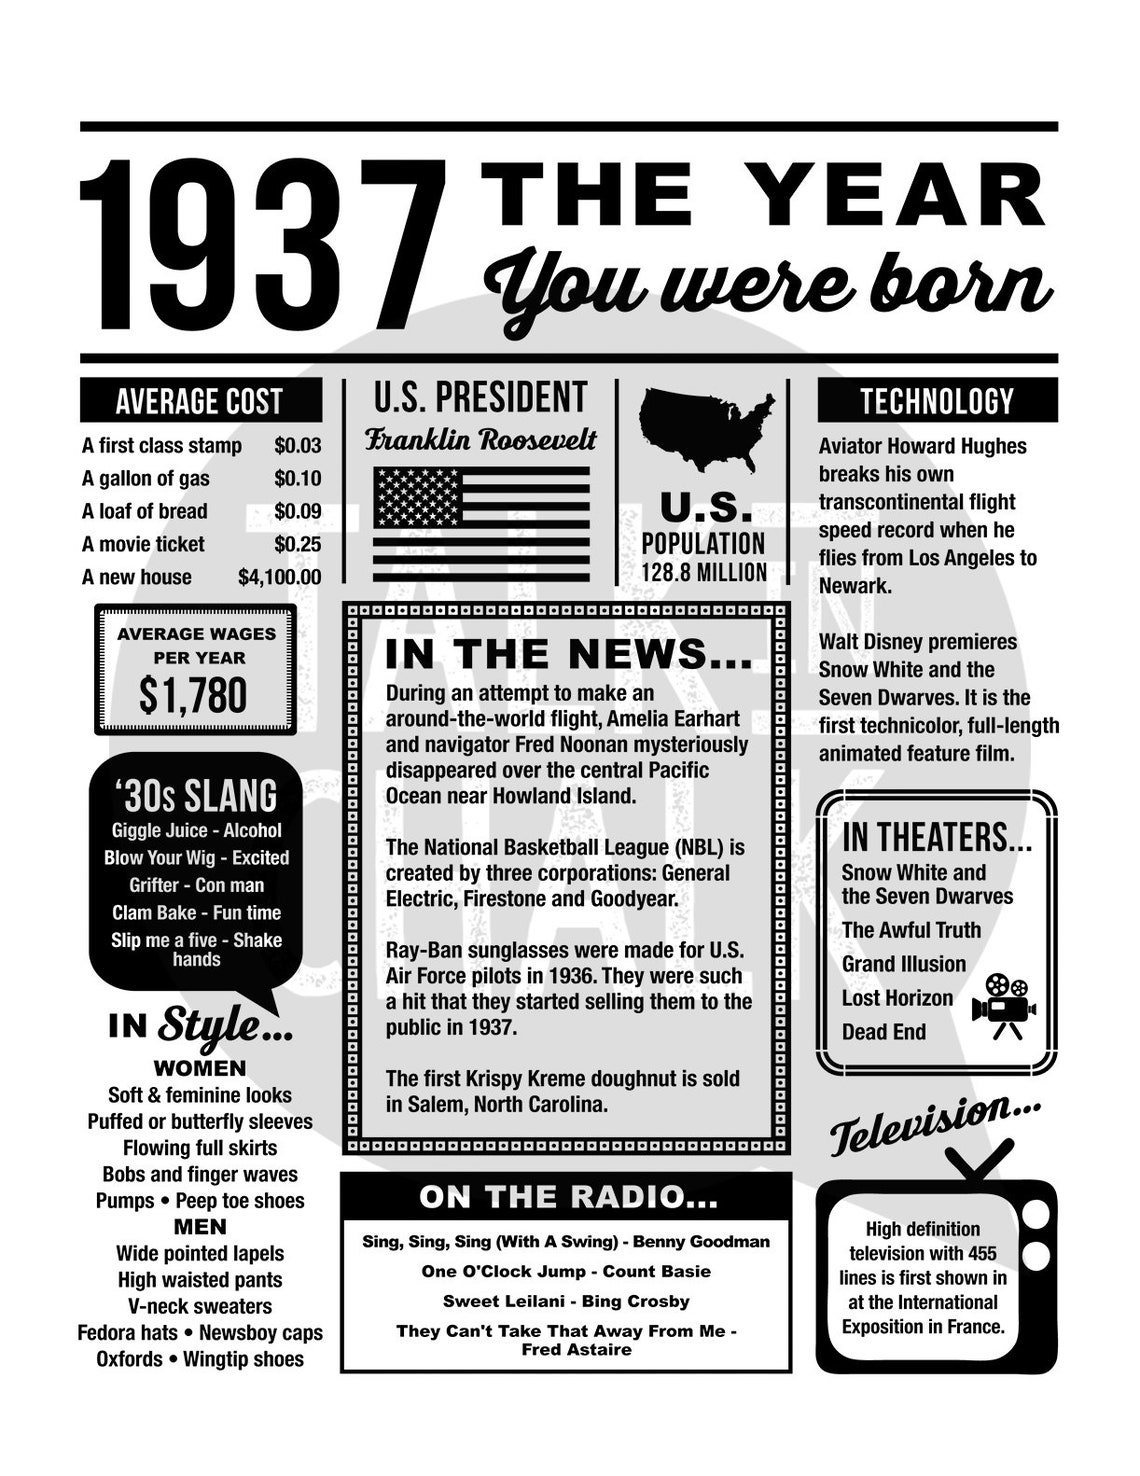 1937-the-year-you-were-born-printable-1937-printable-etsy